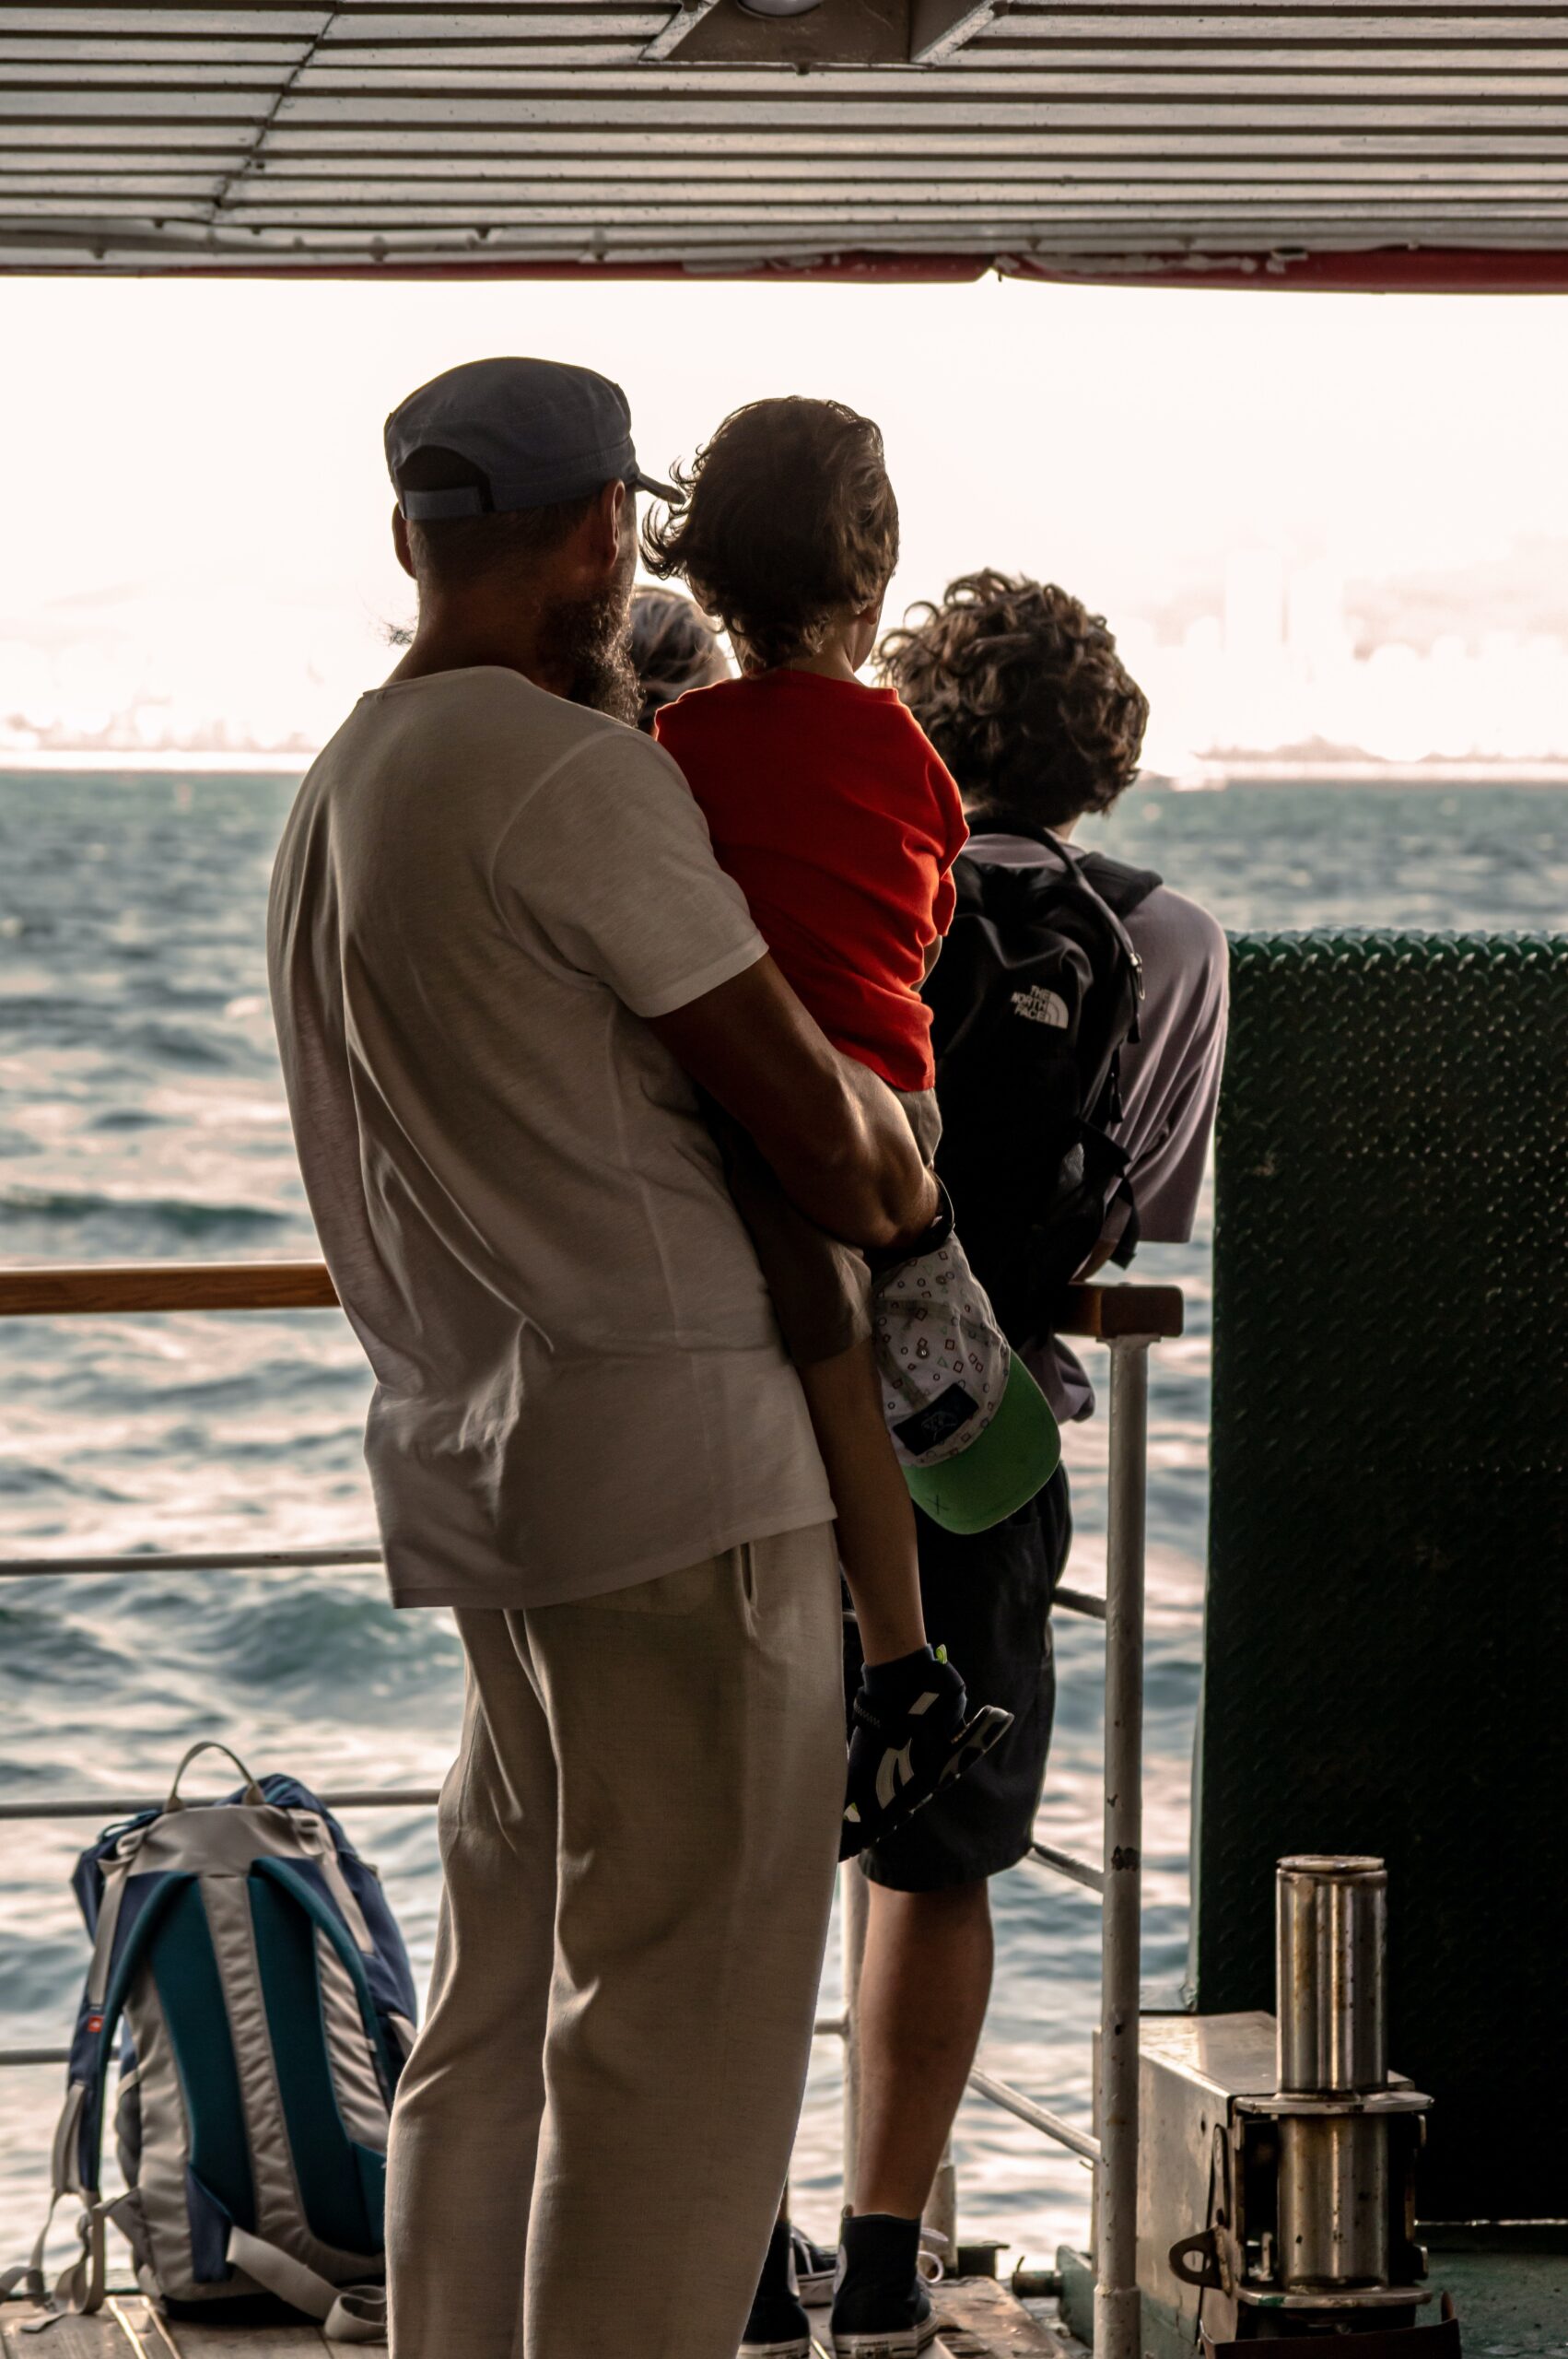 A man standing with his children on a ship image